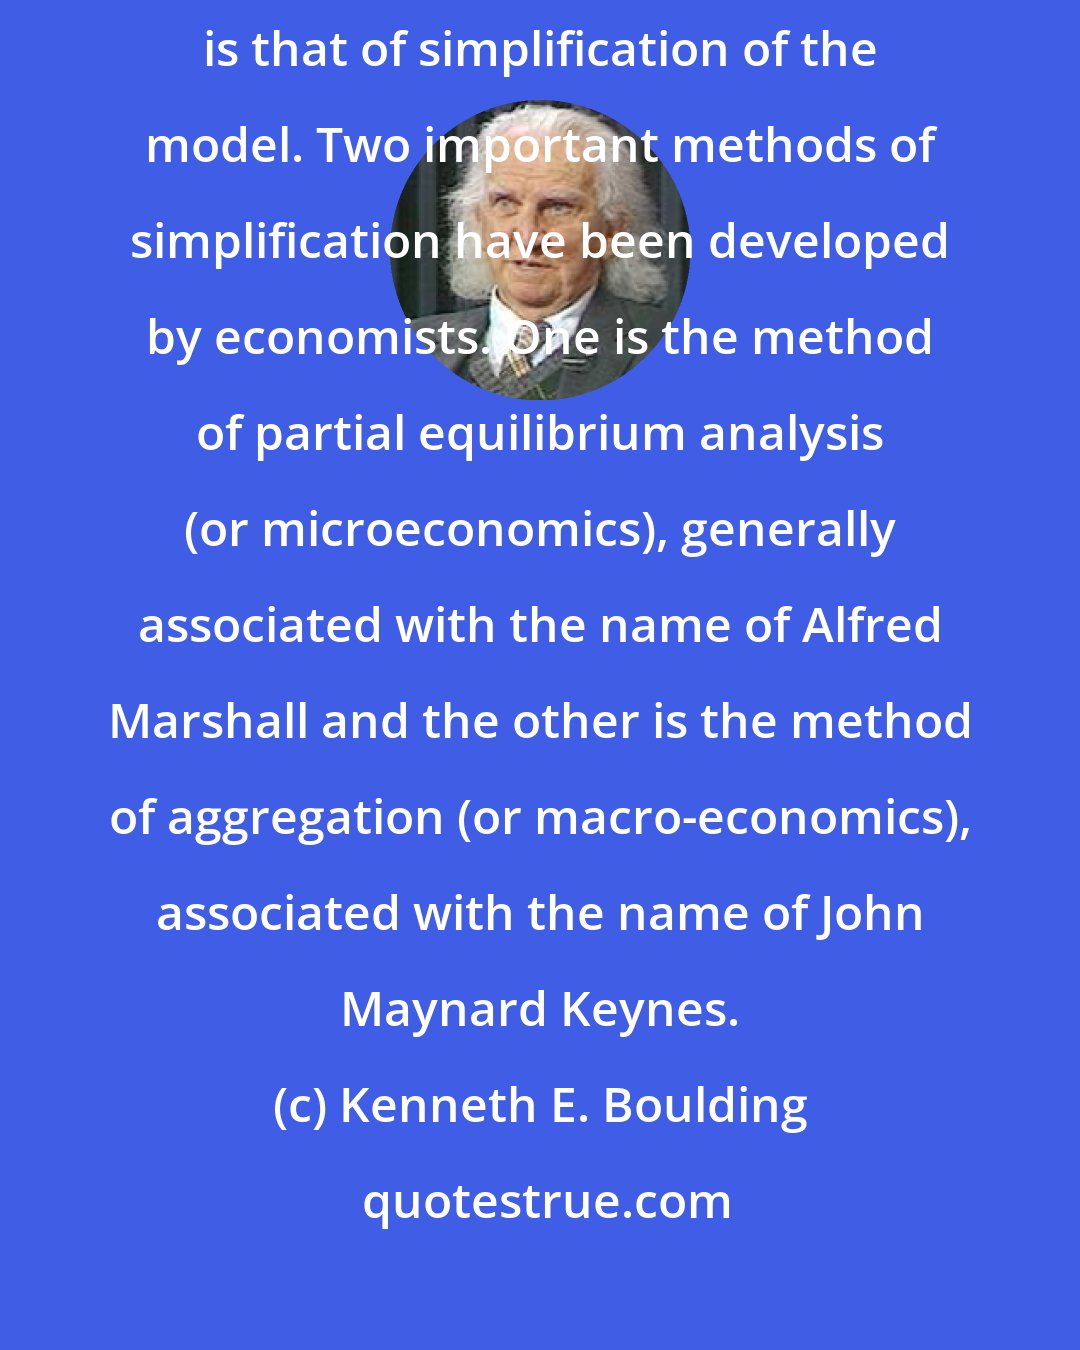 Kenneth E. Boulding: One of the most important skills of the economist, therefore, is that of simplification of the model. Two important methods of simplification have been developed by economists. One is the method of partial equilibrium analysis (or microeconomics), generally associated with the name of Alfred Marshall and the other is the method of aggregation (or macro-economics), associated with the name of John Maynard Keynes.